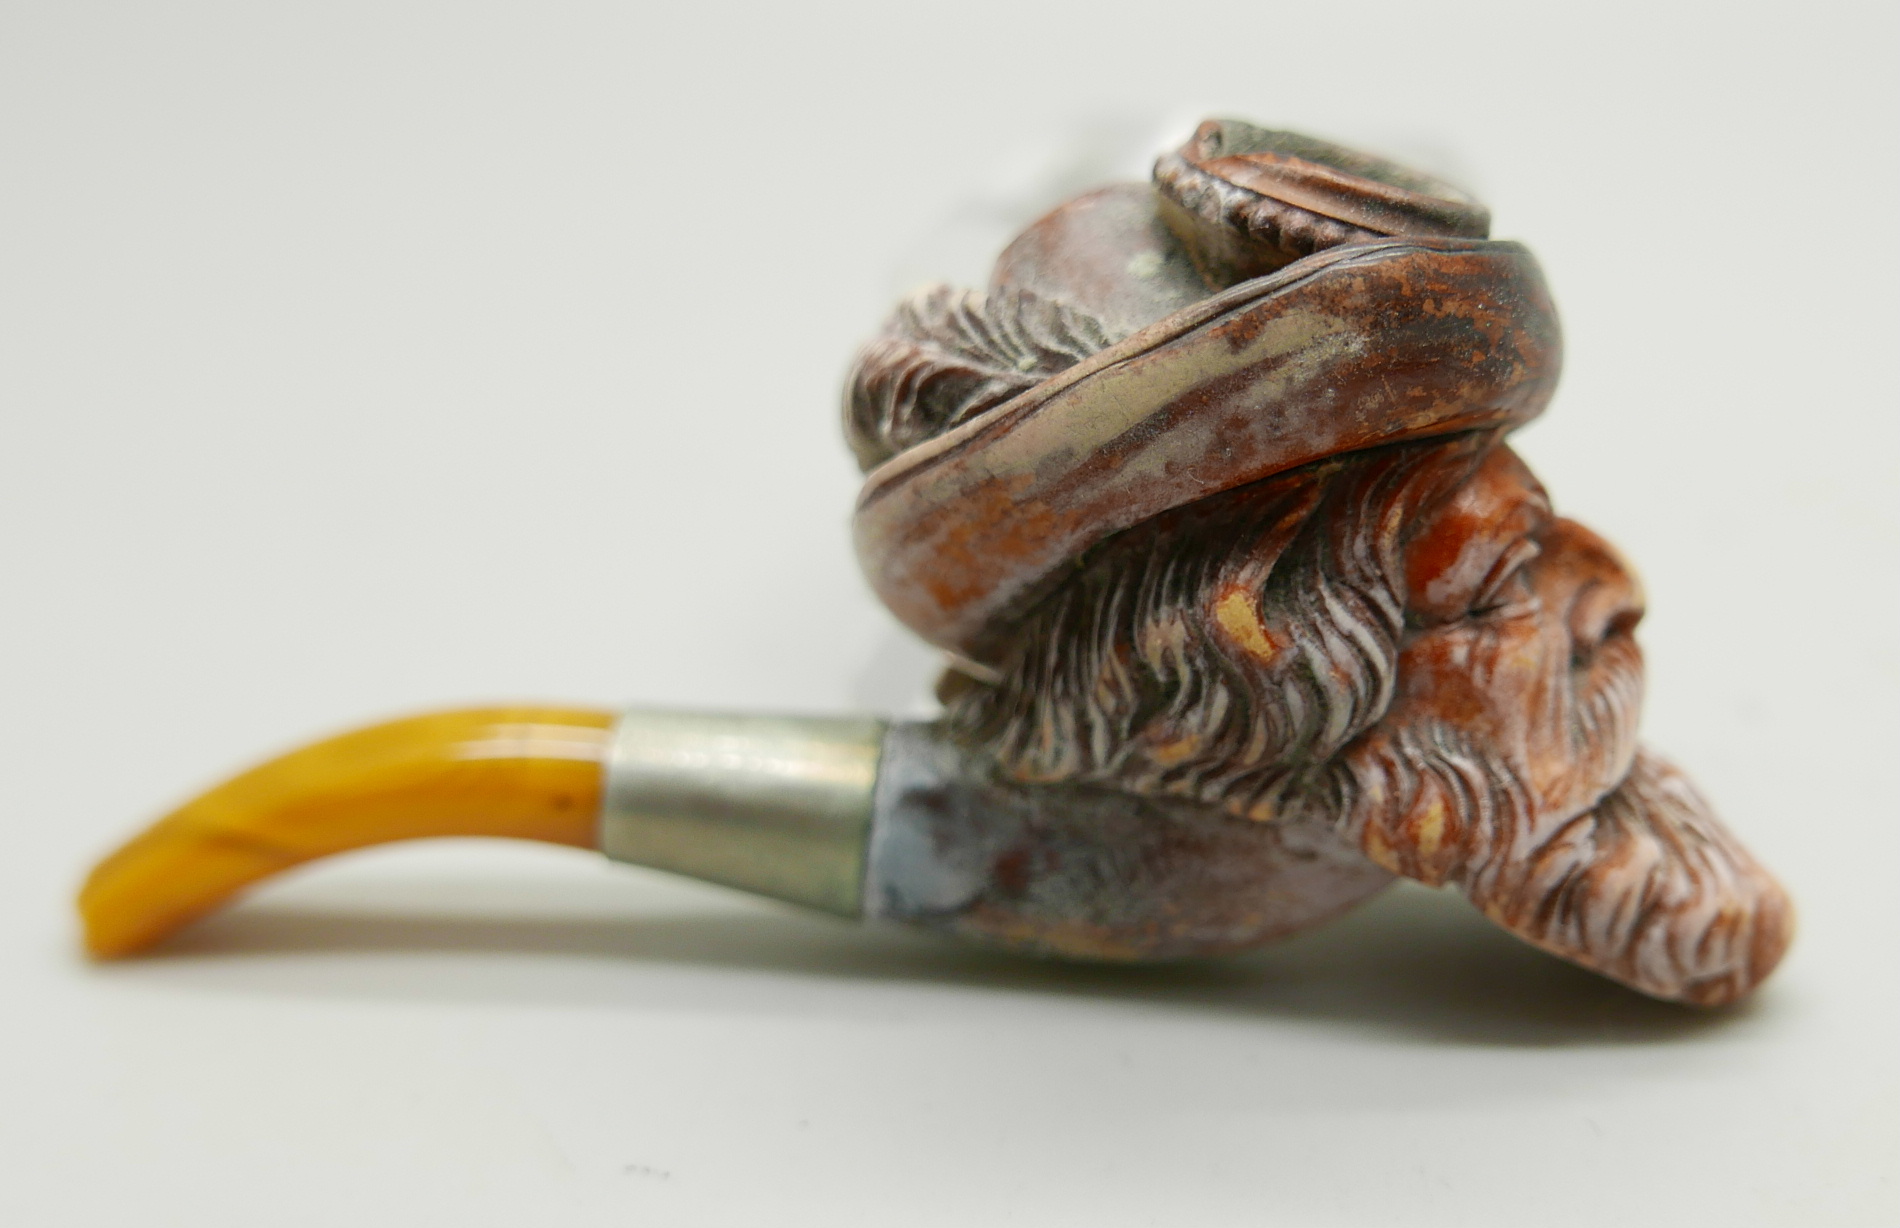 A 19th Century Meerschaum pipe with amber stem, Bavarian man with beard and hat with feather - Image 3 of 5